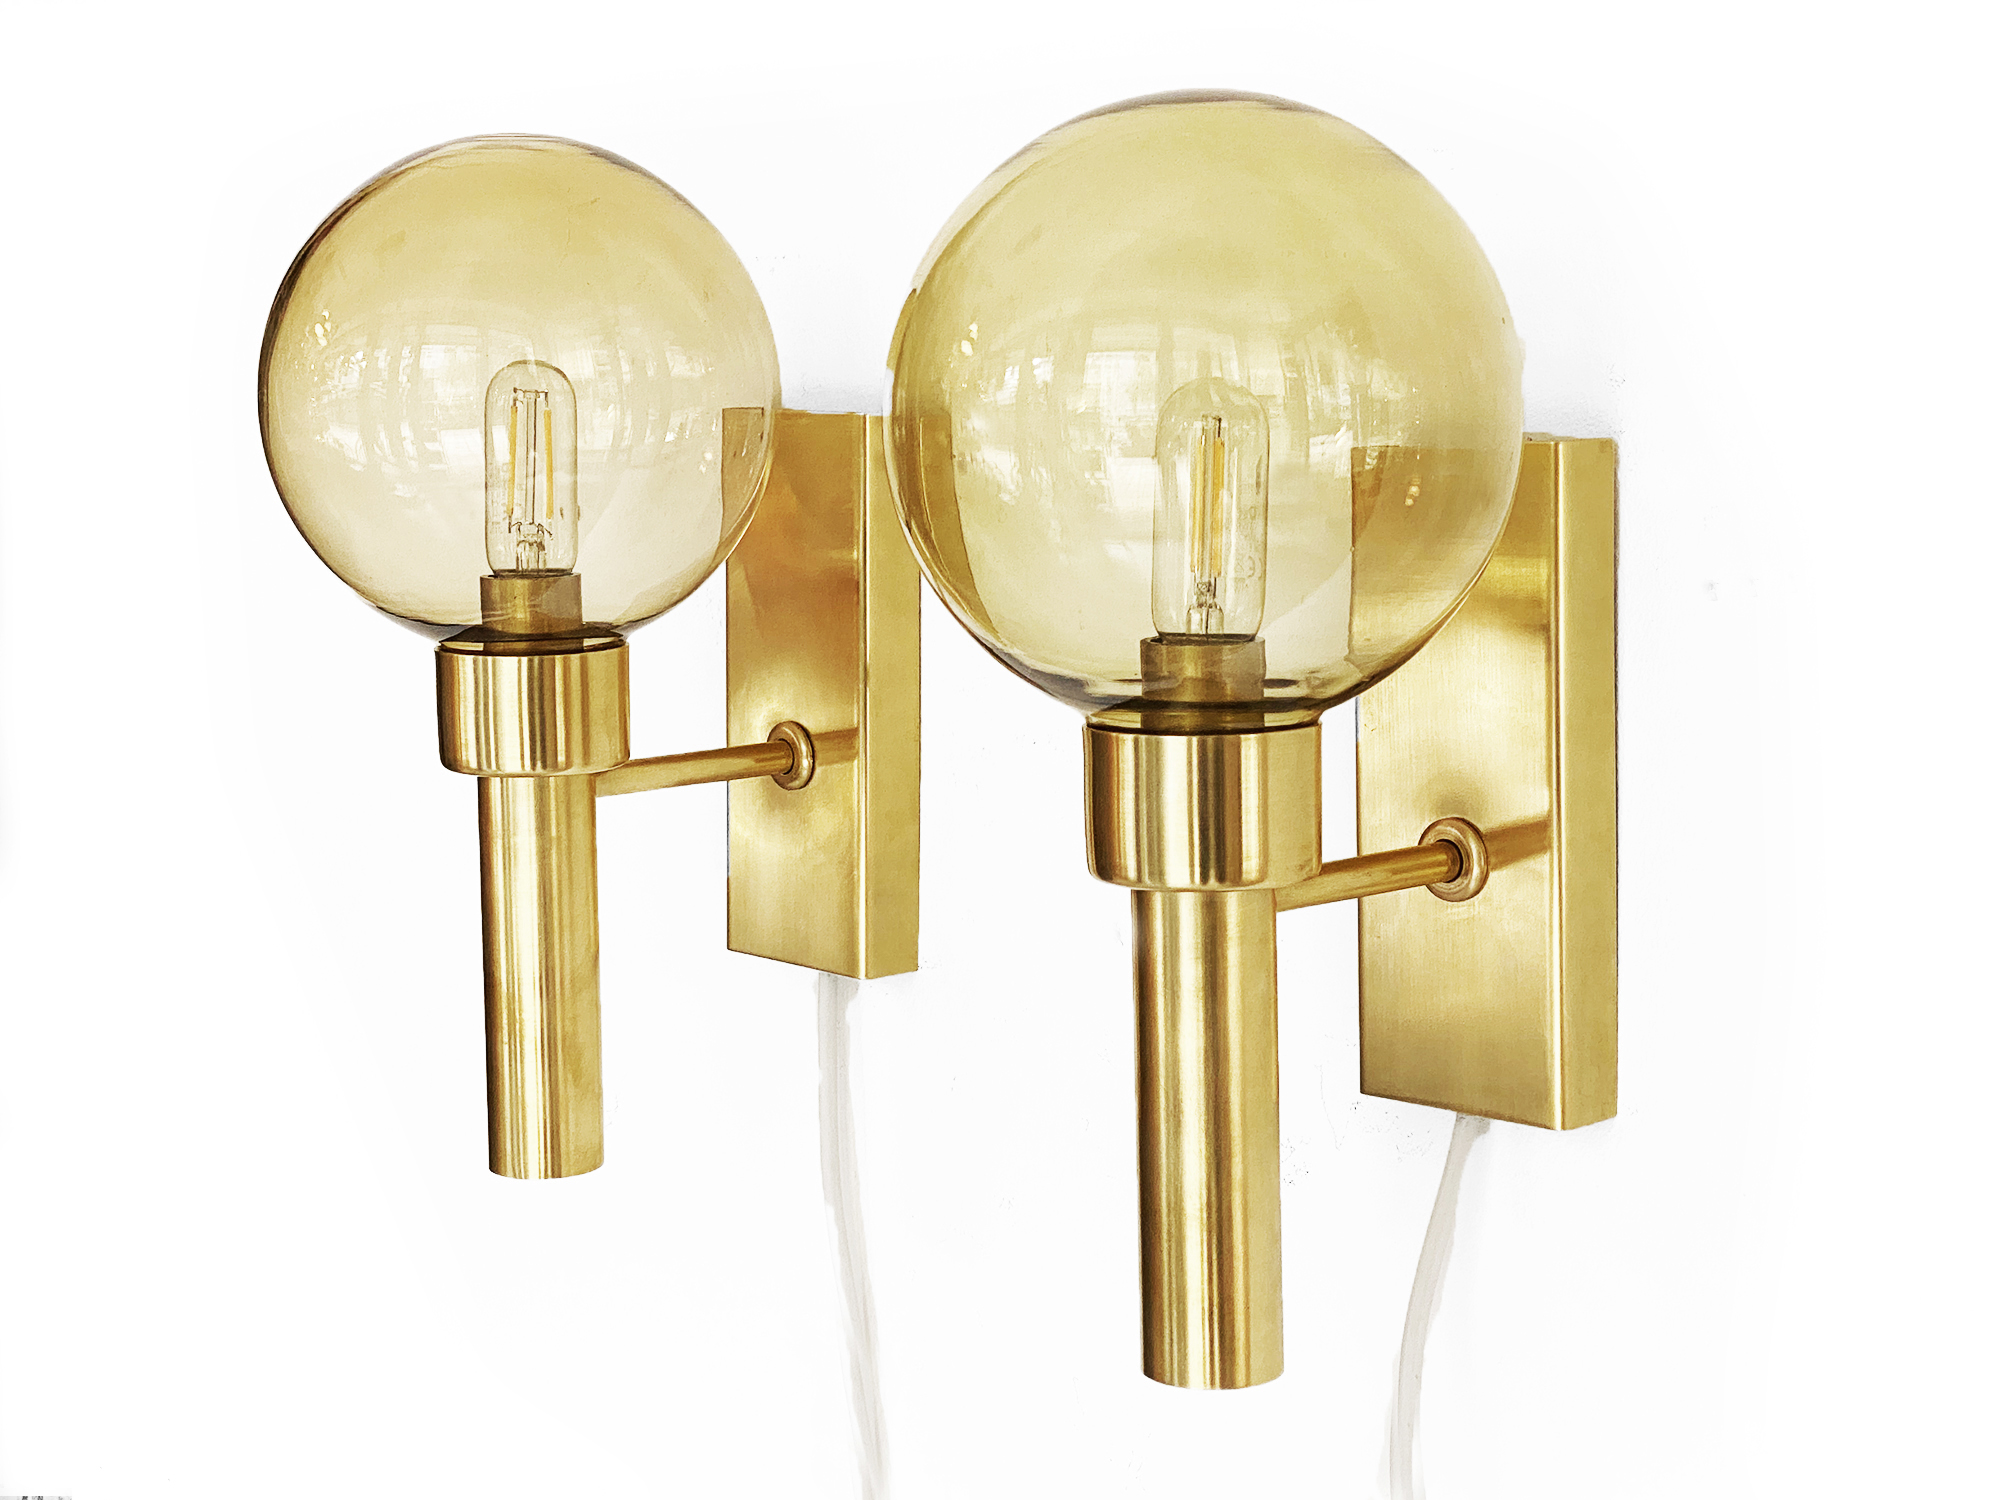 Pair of wall lights/sconces "Bodegalampet" by Vitrika. Denmark 1970s